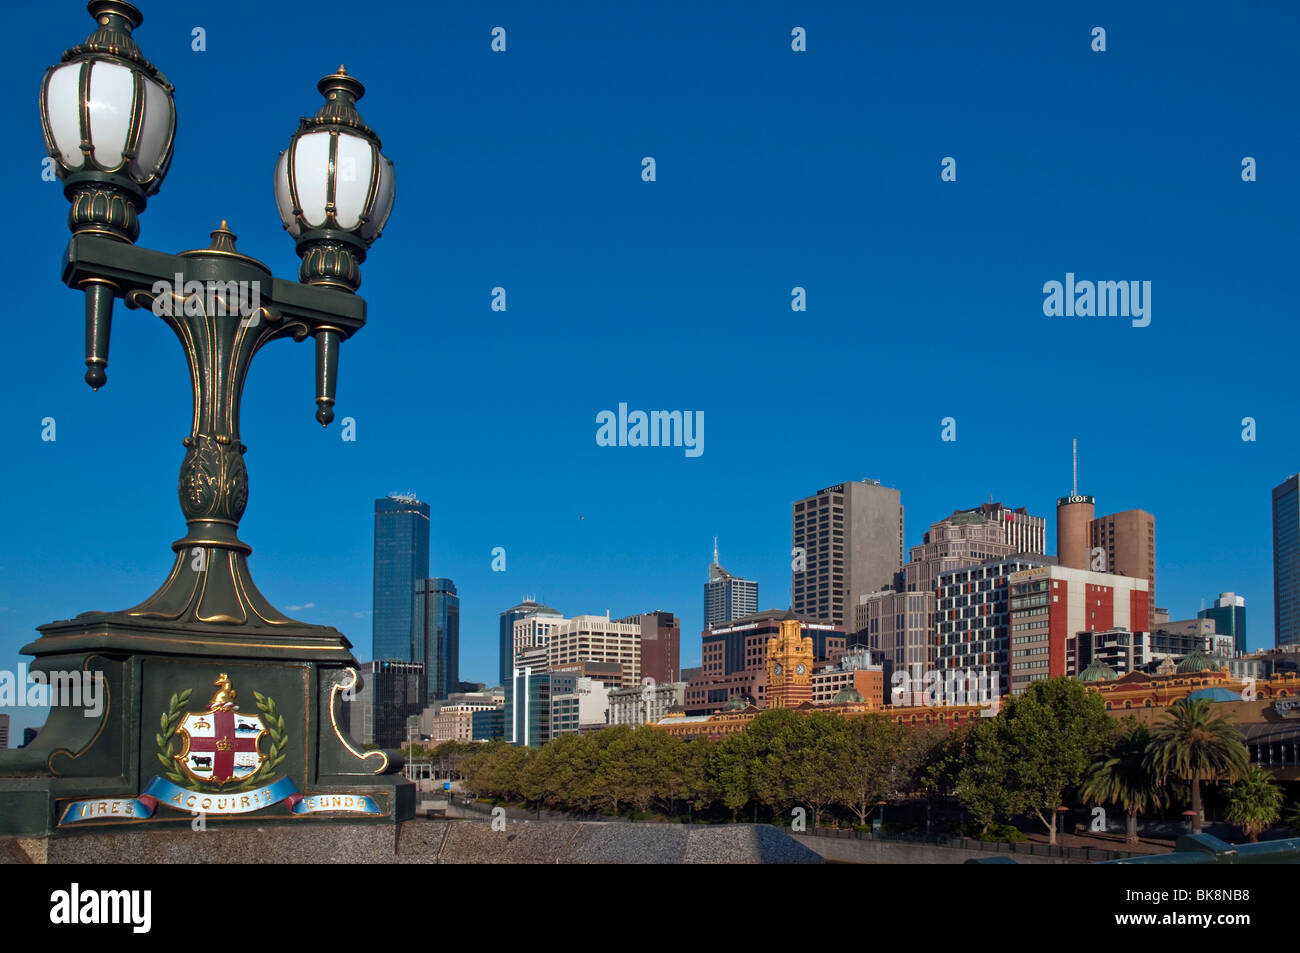 Melbourne skyline from Princes Bridge with city coat of arms on lamp standard Stock Photo